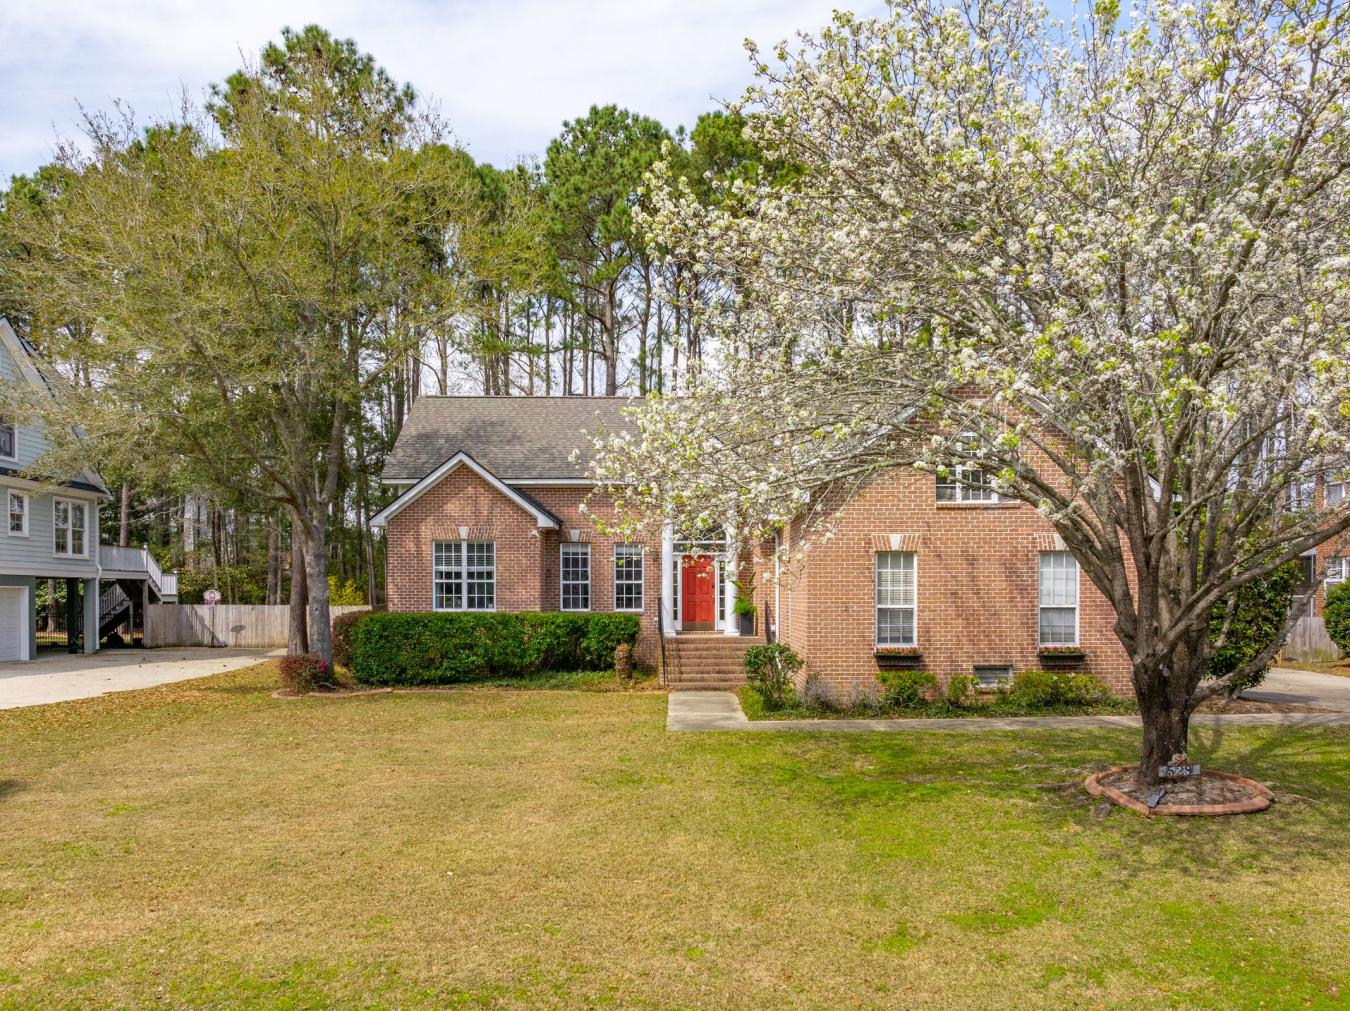 528 Chimney Bluff Drive, Mt Pleasant, South Carolina, 29464, United States, 4 Bedrooms Bedrooms, ,3 BathroomsBathrooms,Residential,For Sale,528 Chimney Bluff Drive,1488088